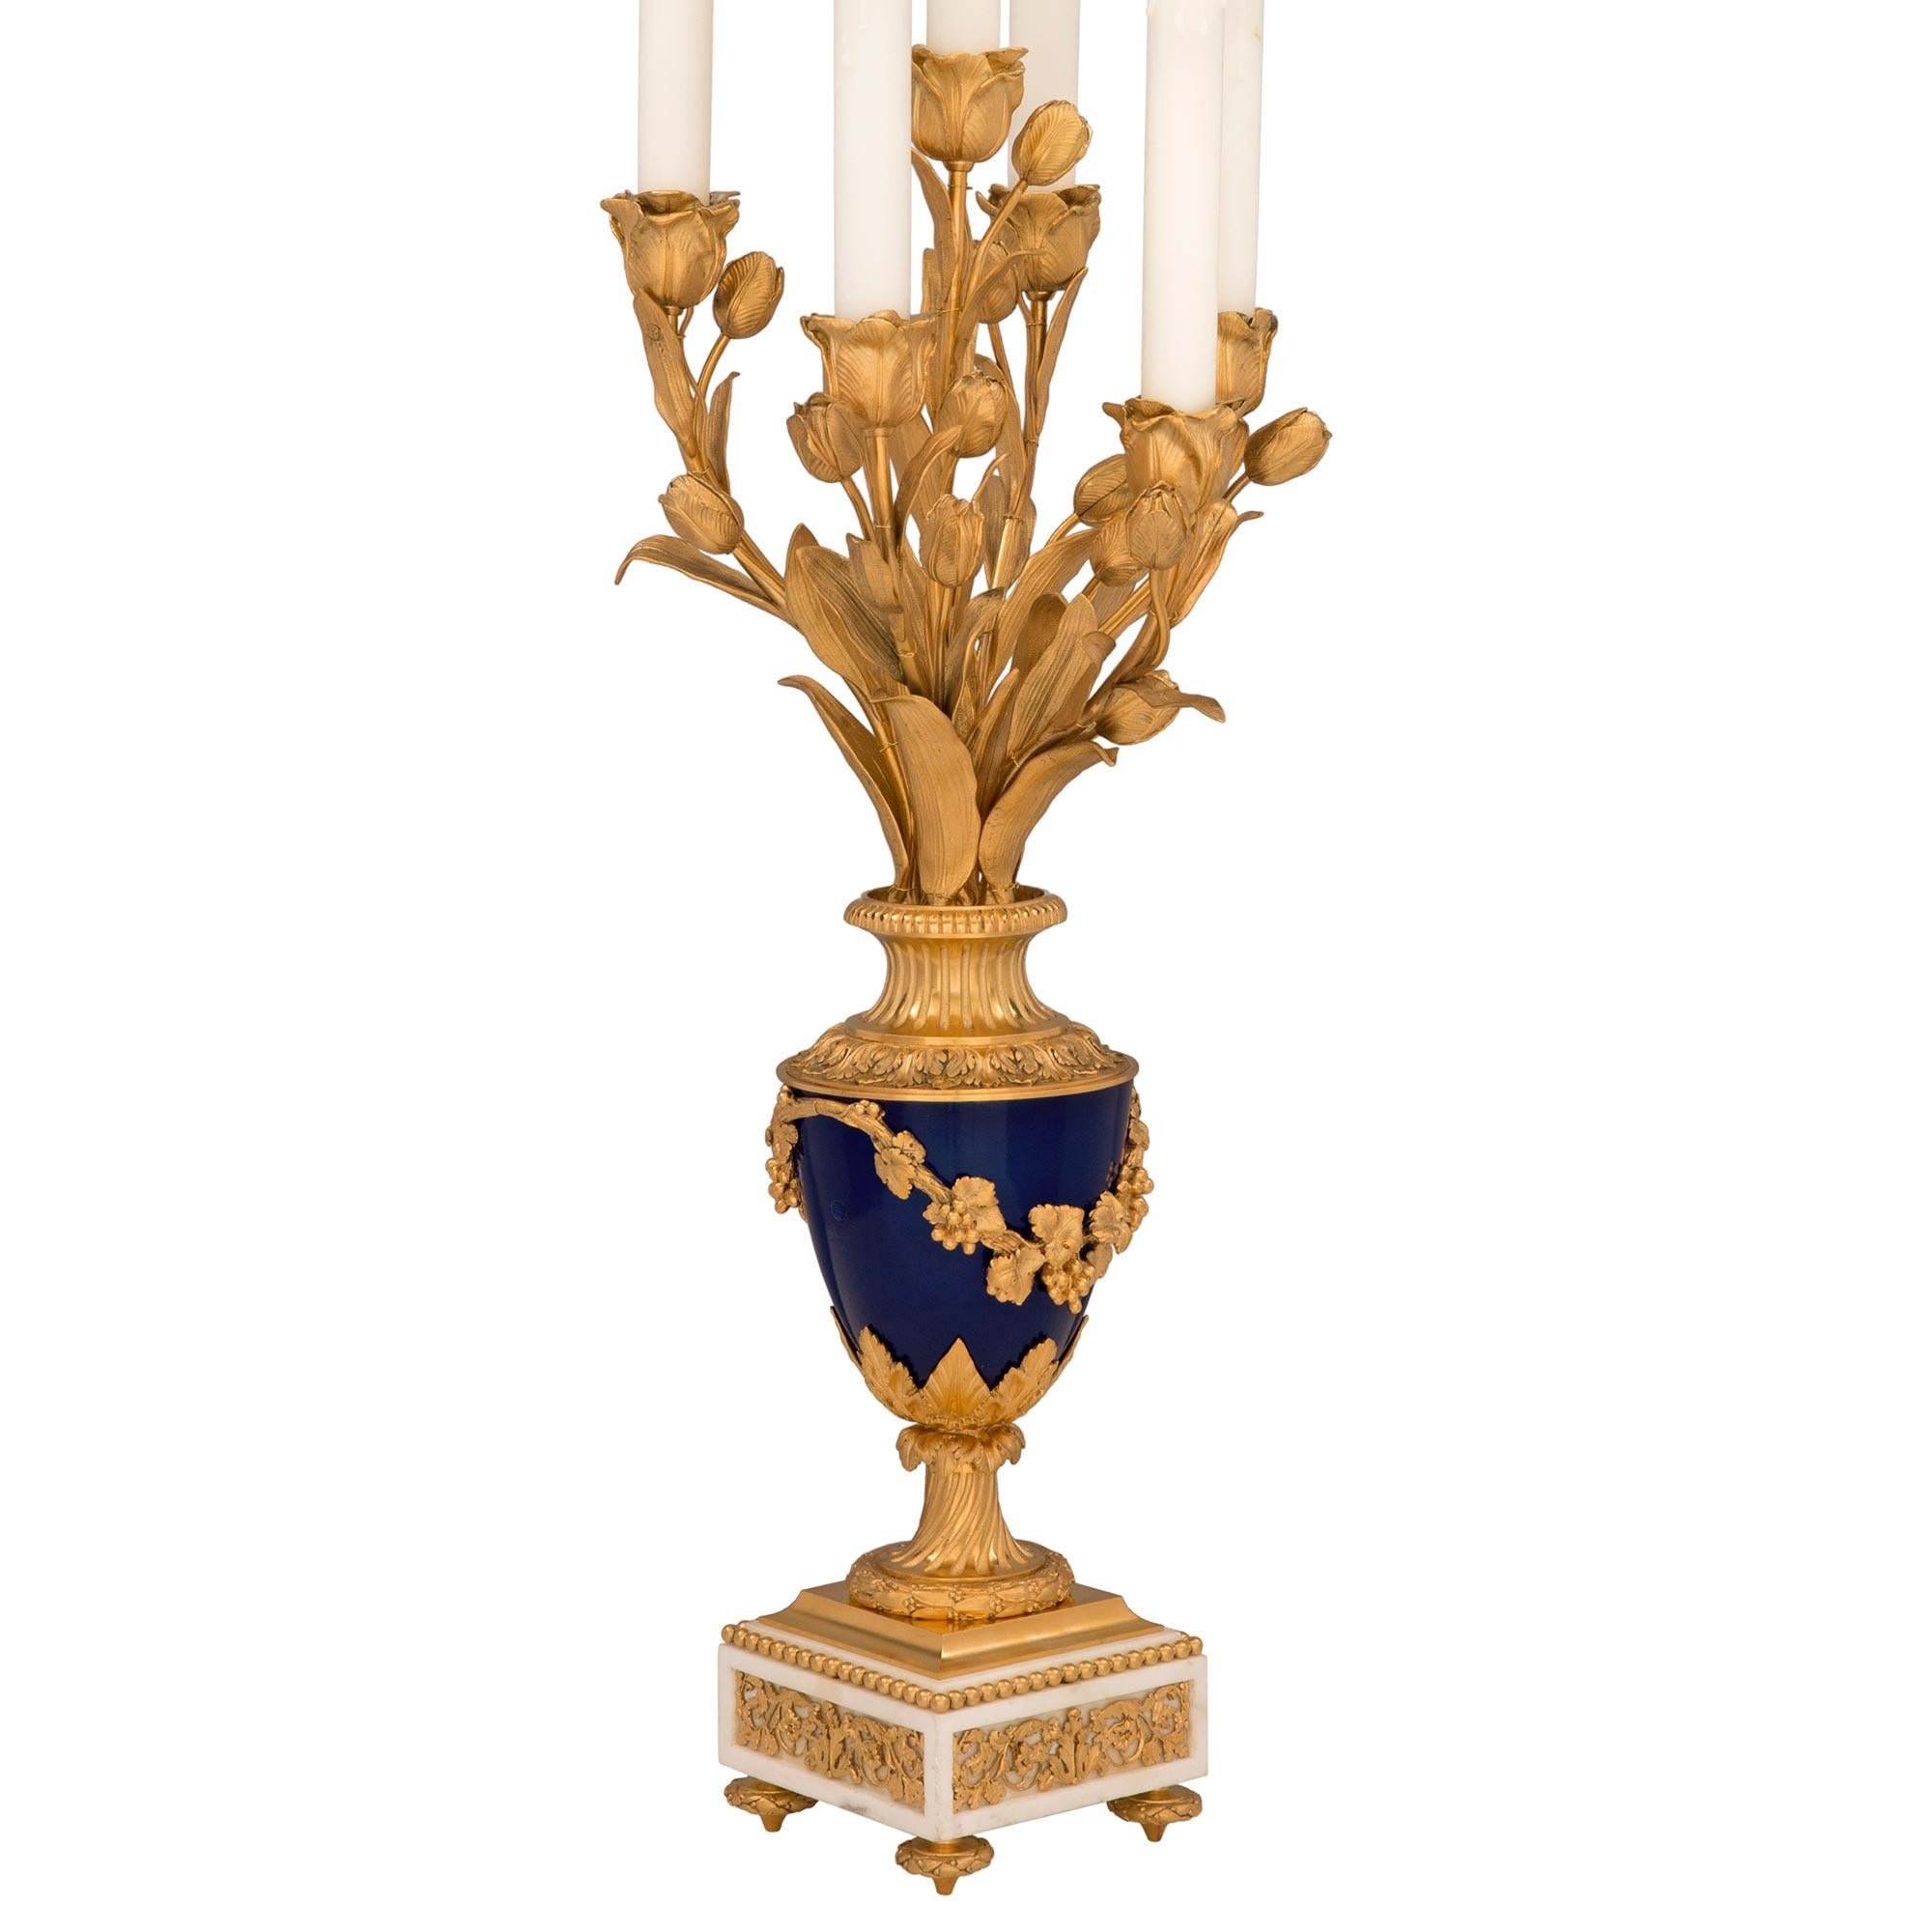 An exquisite pair of French 19th century Louis XVI st. white Carrara marble, ormolu and Sèvres porcelain candelabra lamps. Each six arm lamp is raised by elegant topie shaped feet below a square white Carrara marble base decorated with exceptional